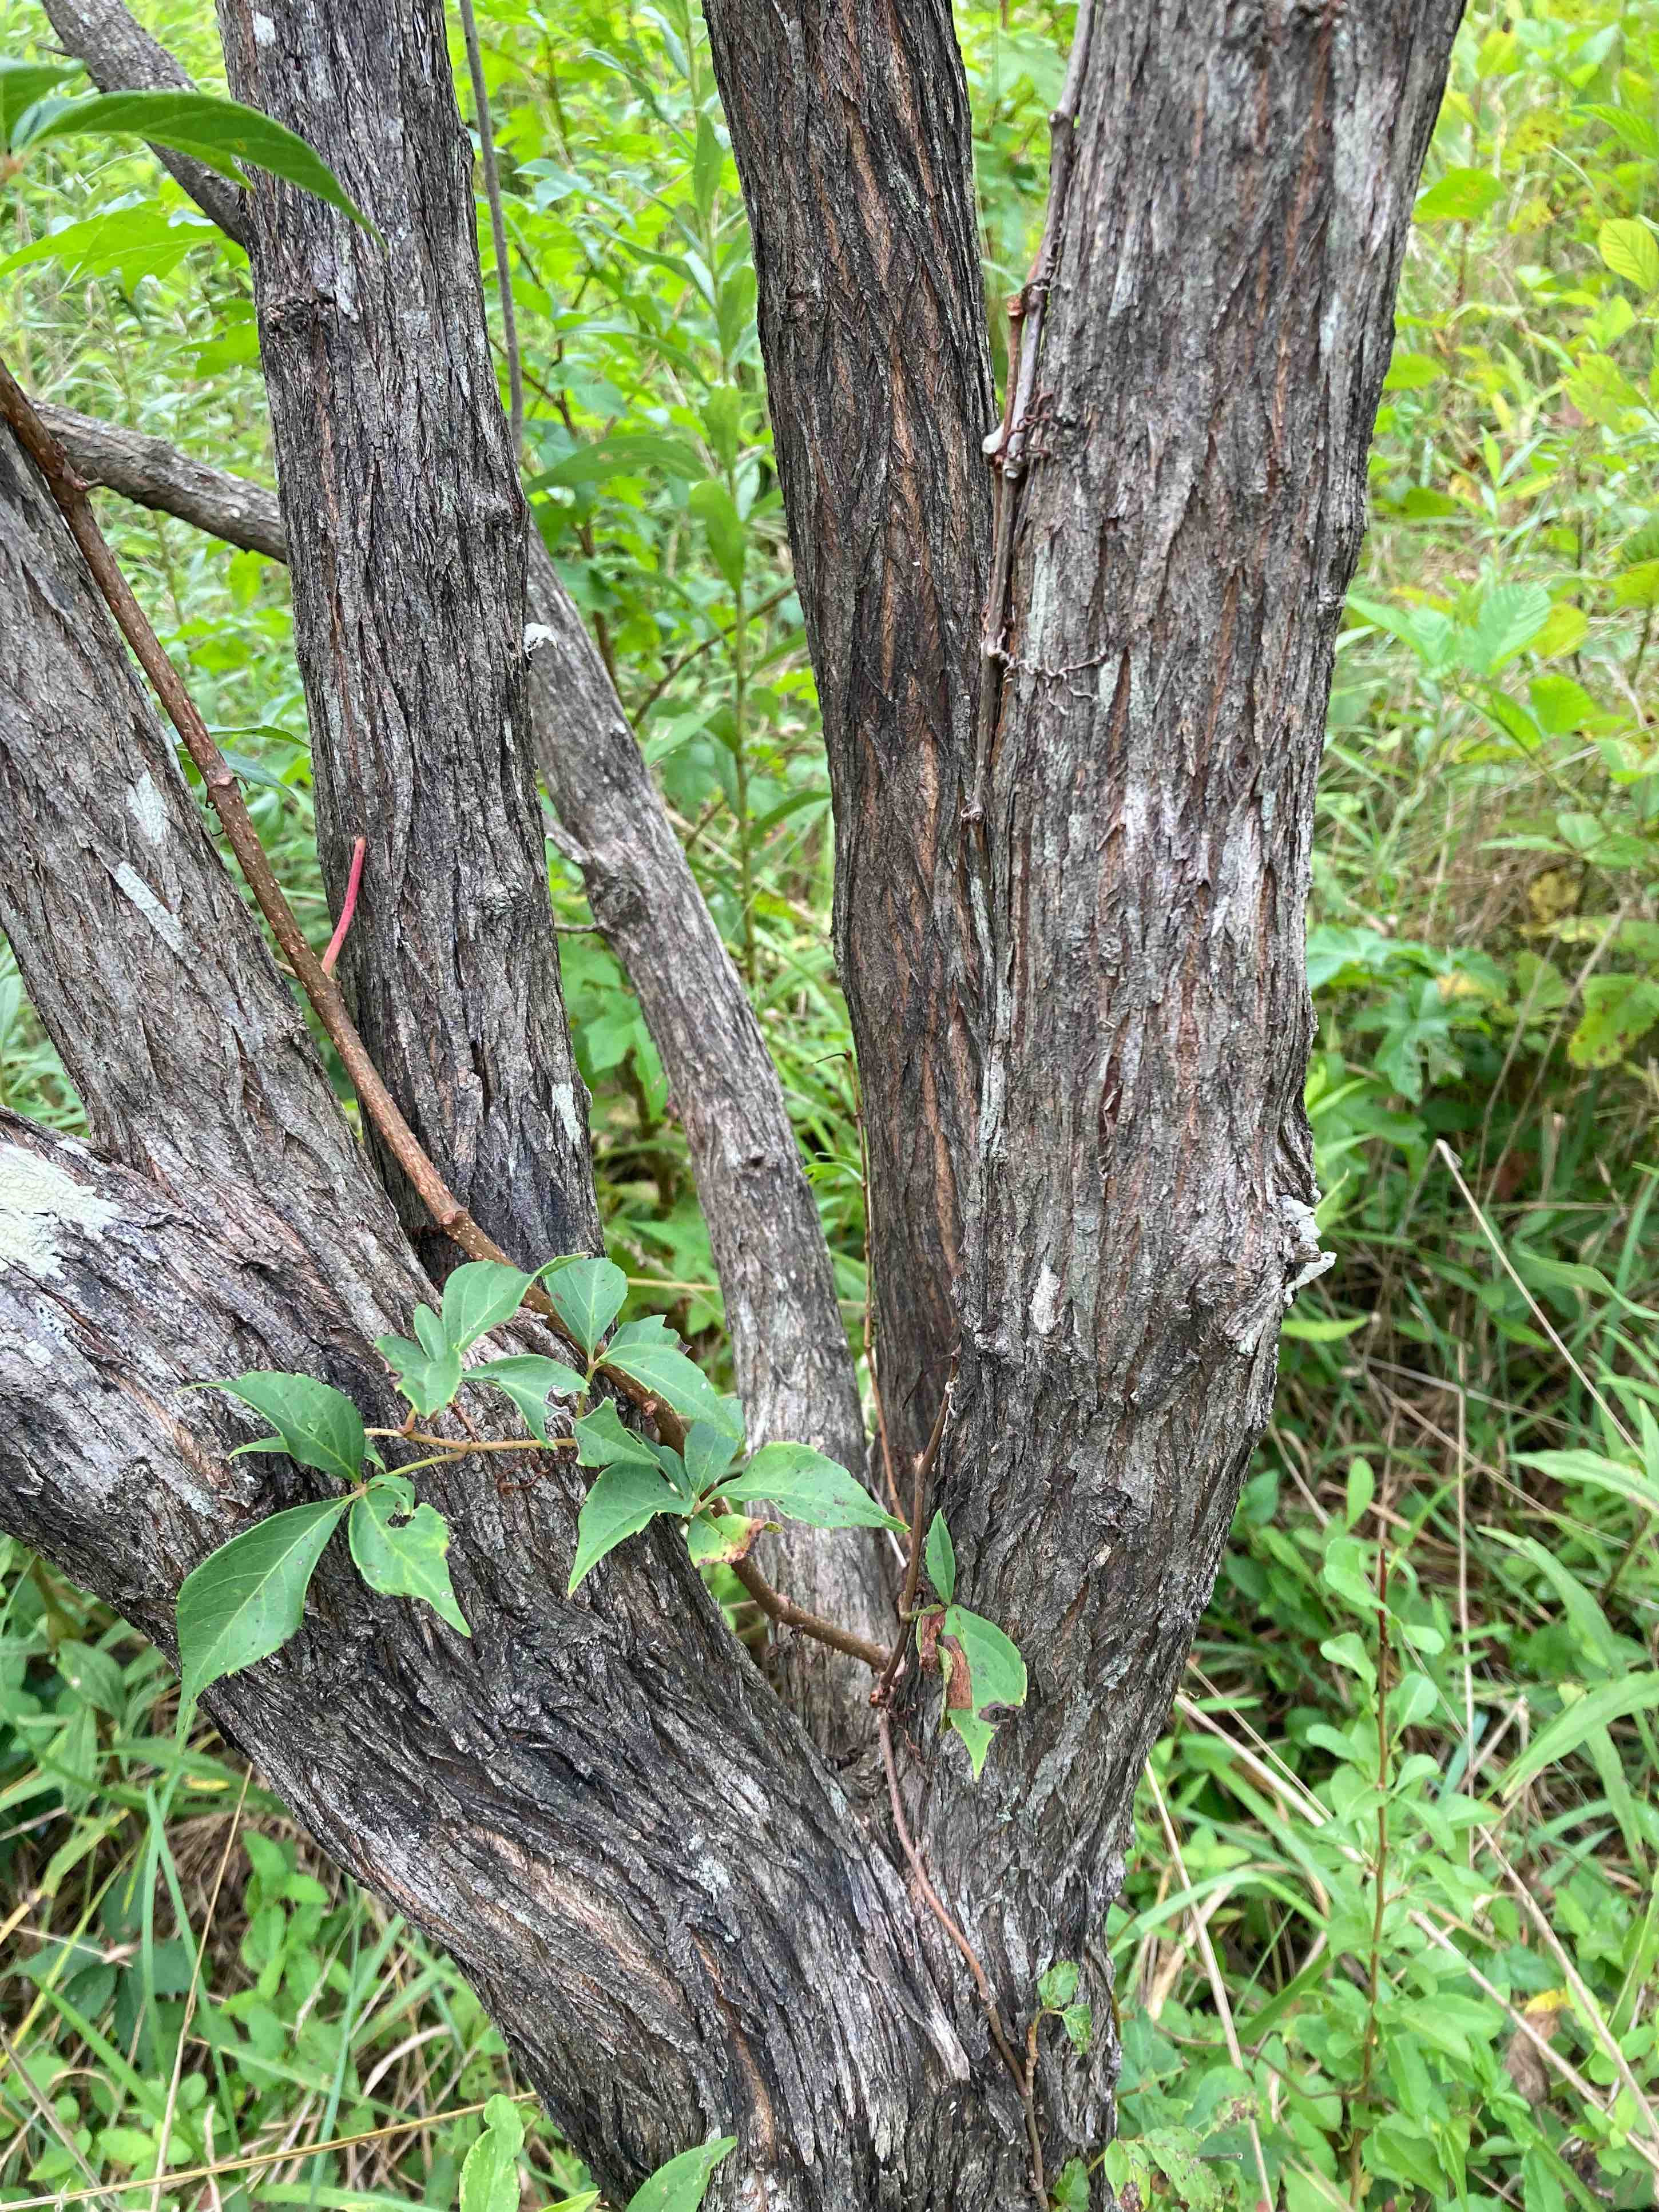 The Scientific Name is Baccharis halimifolia. You will likely hear them called Silverling, High-tide Bush, Mullet Bush, Groundsel Tree, Sea Myrtle. This picture shows the Many branches arise from the short trunks. The bark is orange-brown when young, later gray with flat intersecting ridges and orangeish shallow furrows. of Baccharis halimifolia